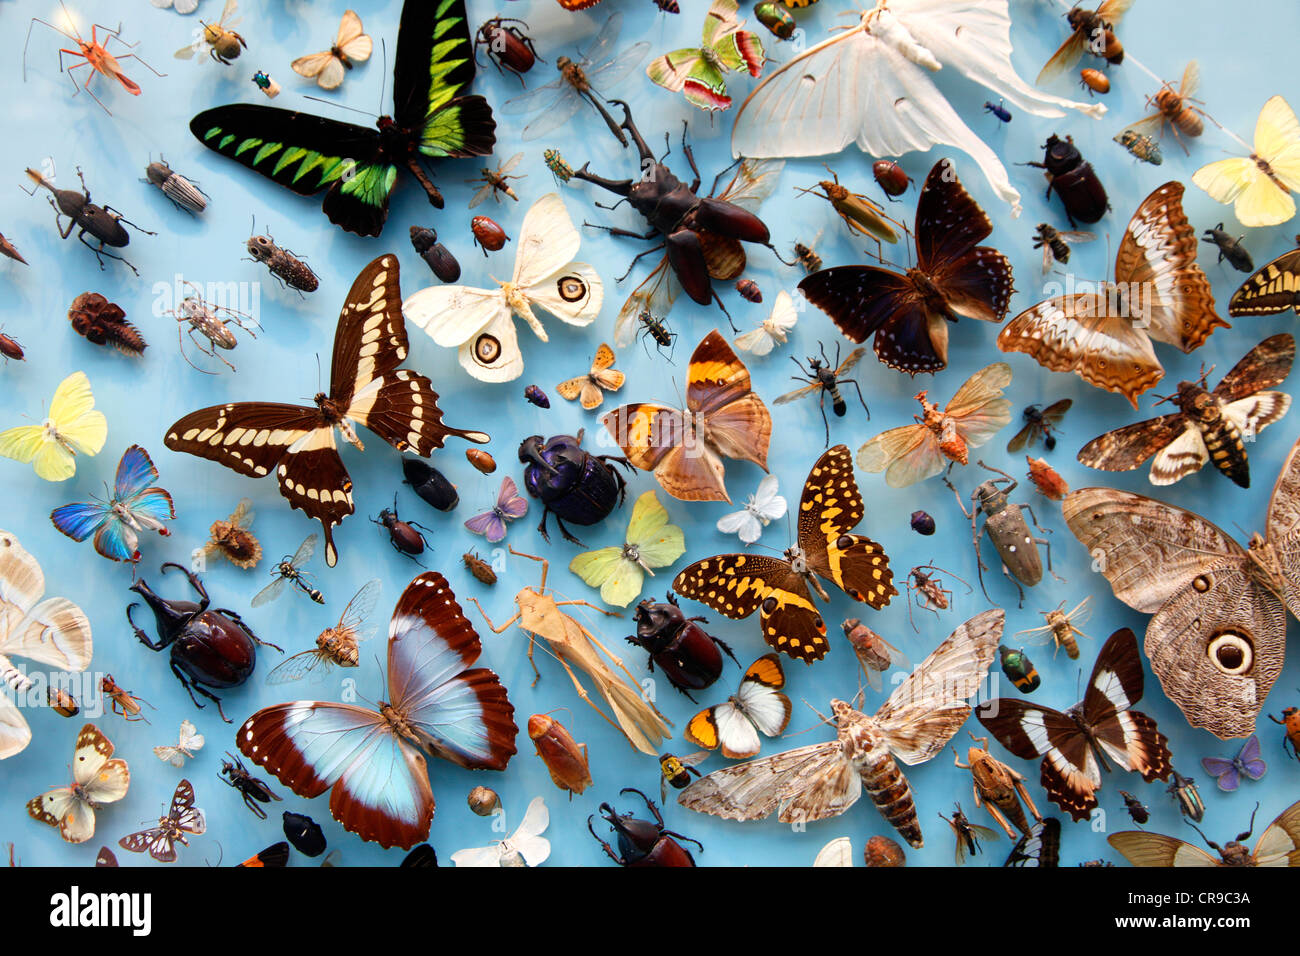 Collection of insects, moths, butterflies, beetles from around the world, the University Museum of Natural History, Oxford Stock Photo